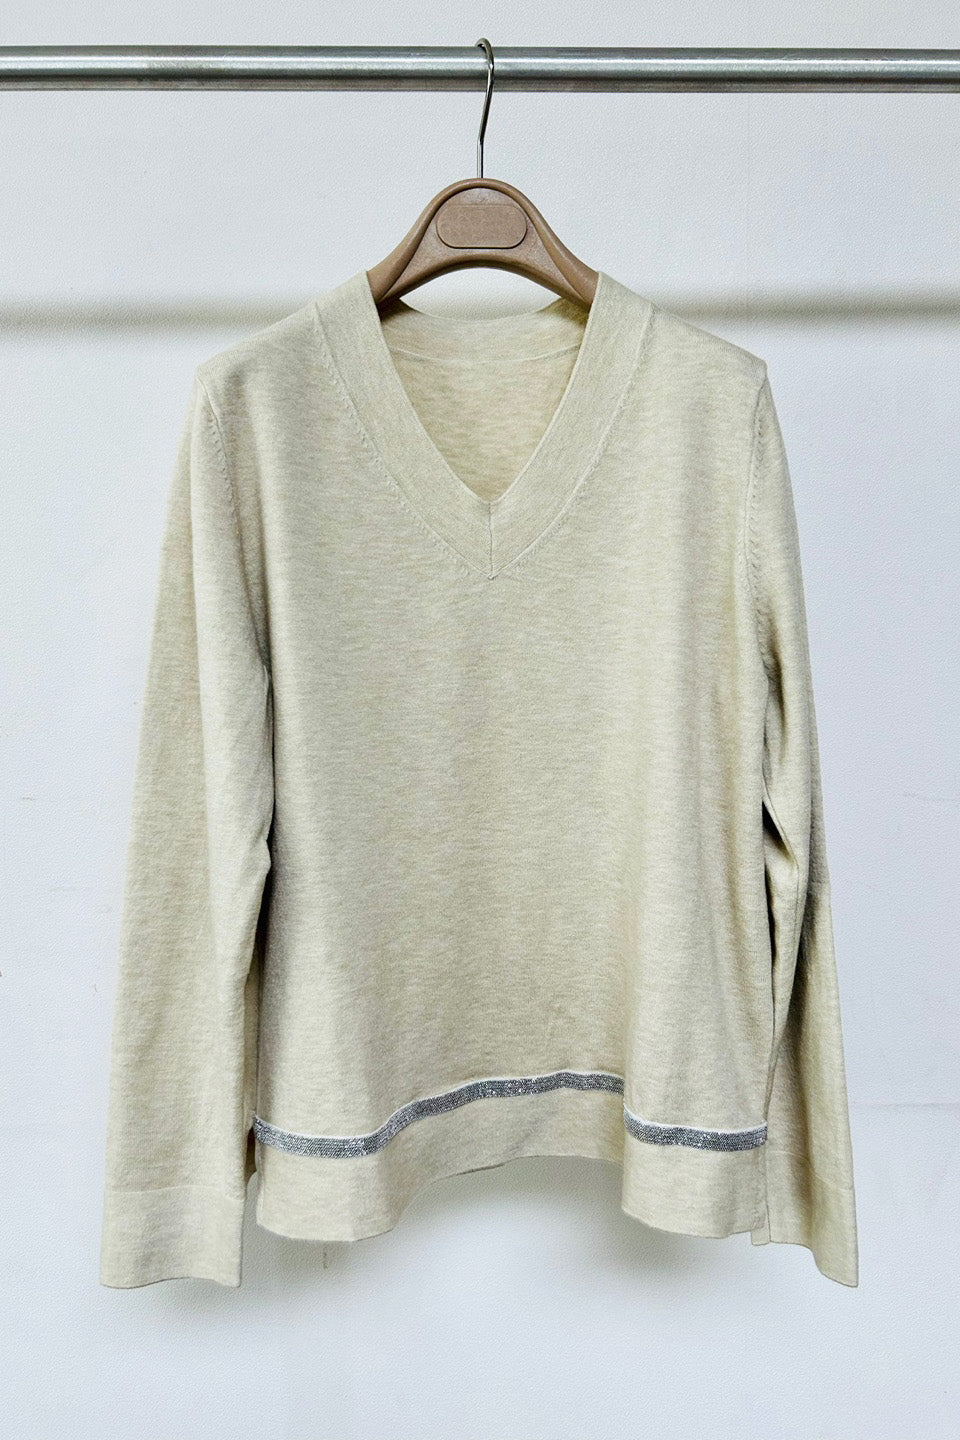 Cute spring knit top for women